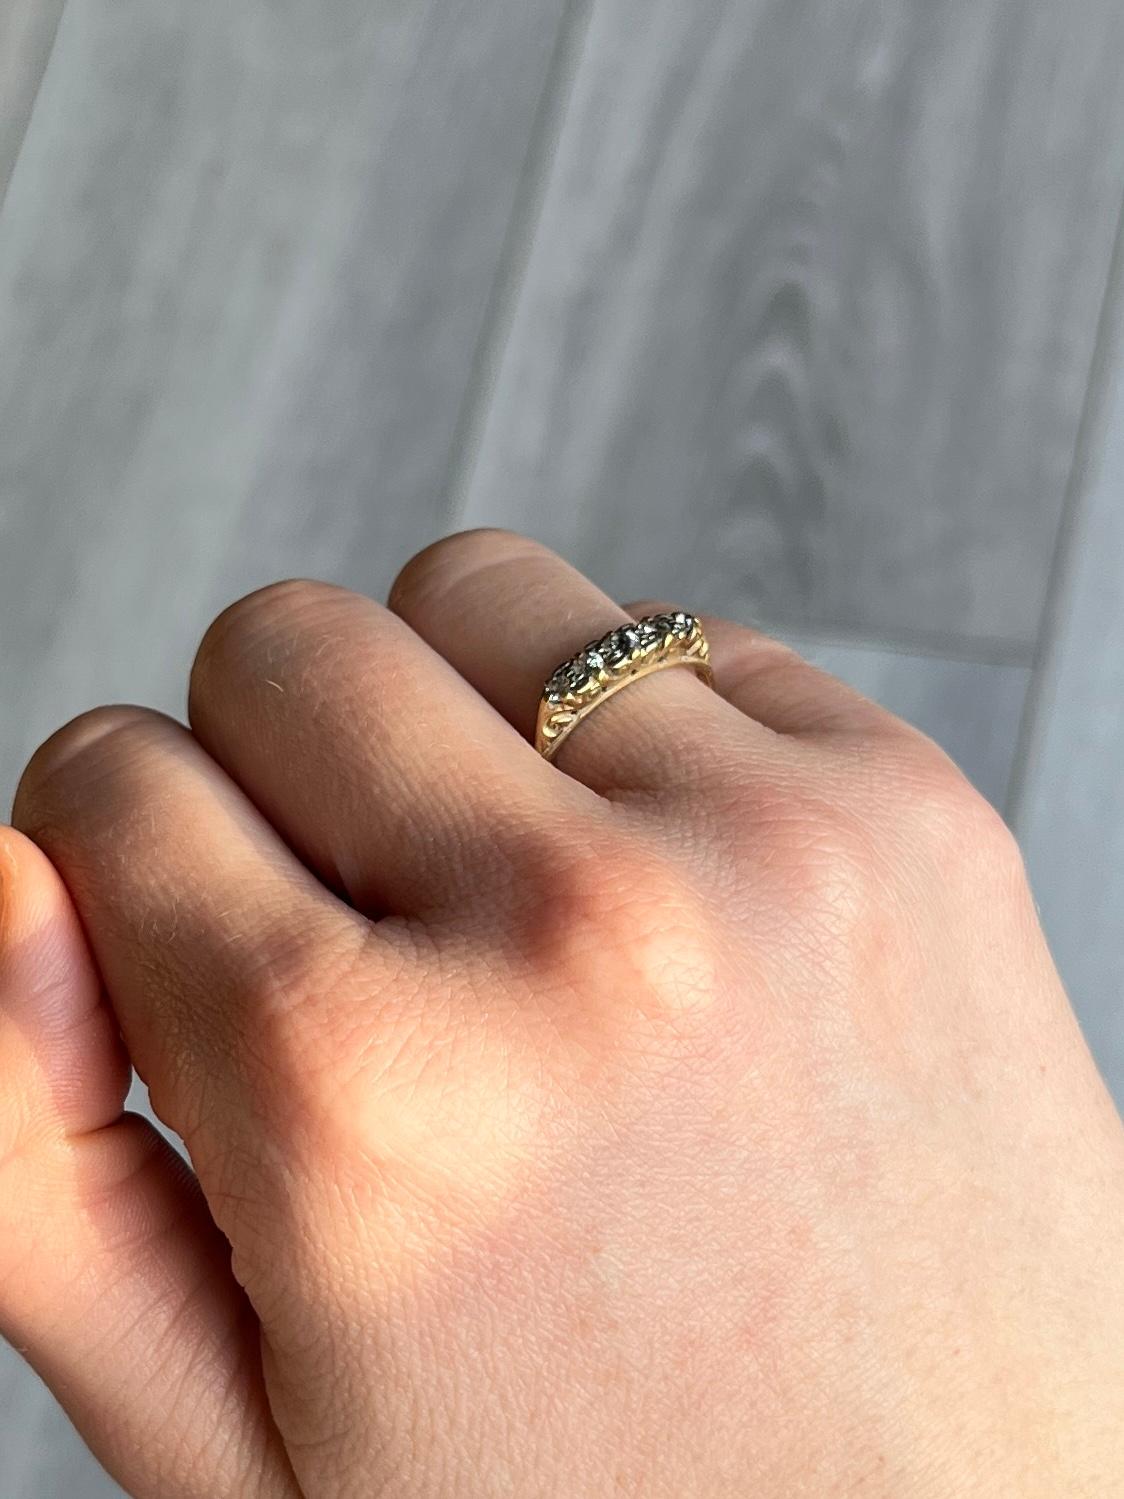 Five bright glistening diamonds sit fabulously on top of a simple open work setting modelled in 18ct gold. The diamonds total 30pts. 

Ring Size: K or 5 1/4
Face Width: 4mm
Height Off Finger: 3.5mm

Weight: 2g